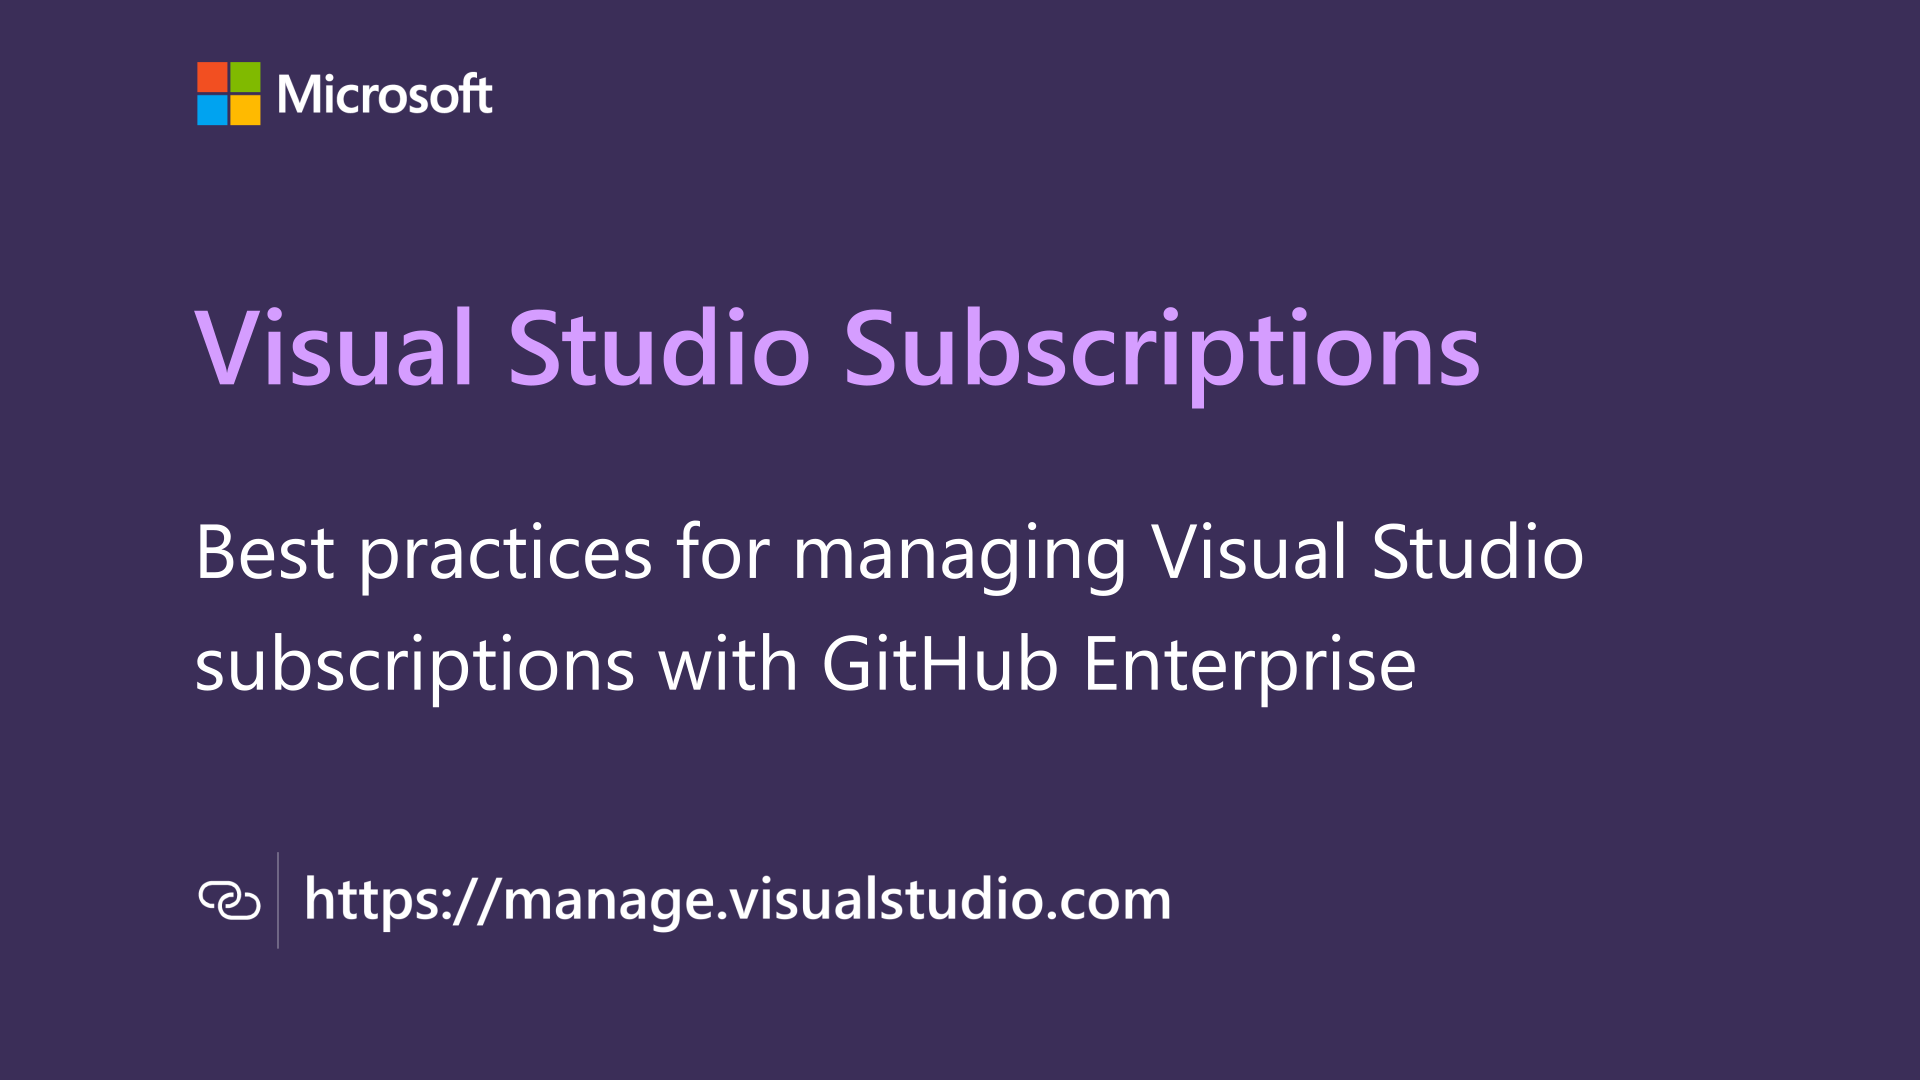 Thumbnail for Best practices for managing Visual Studio subscriptions with GitHub Enterpriseg